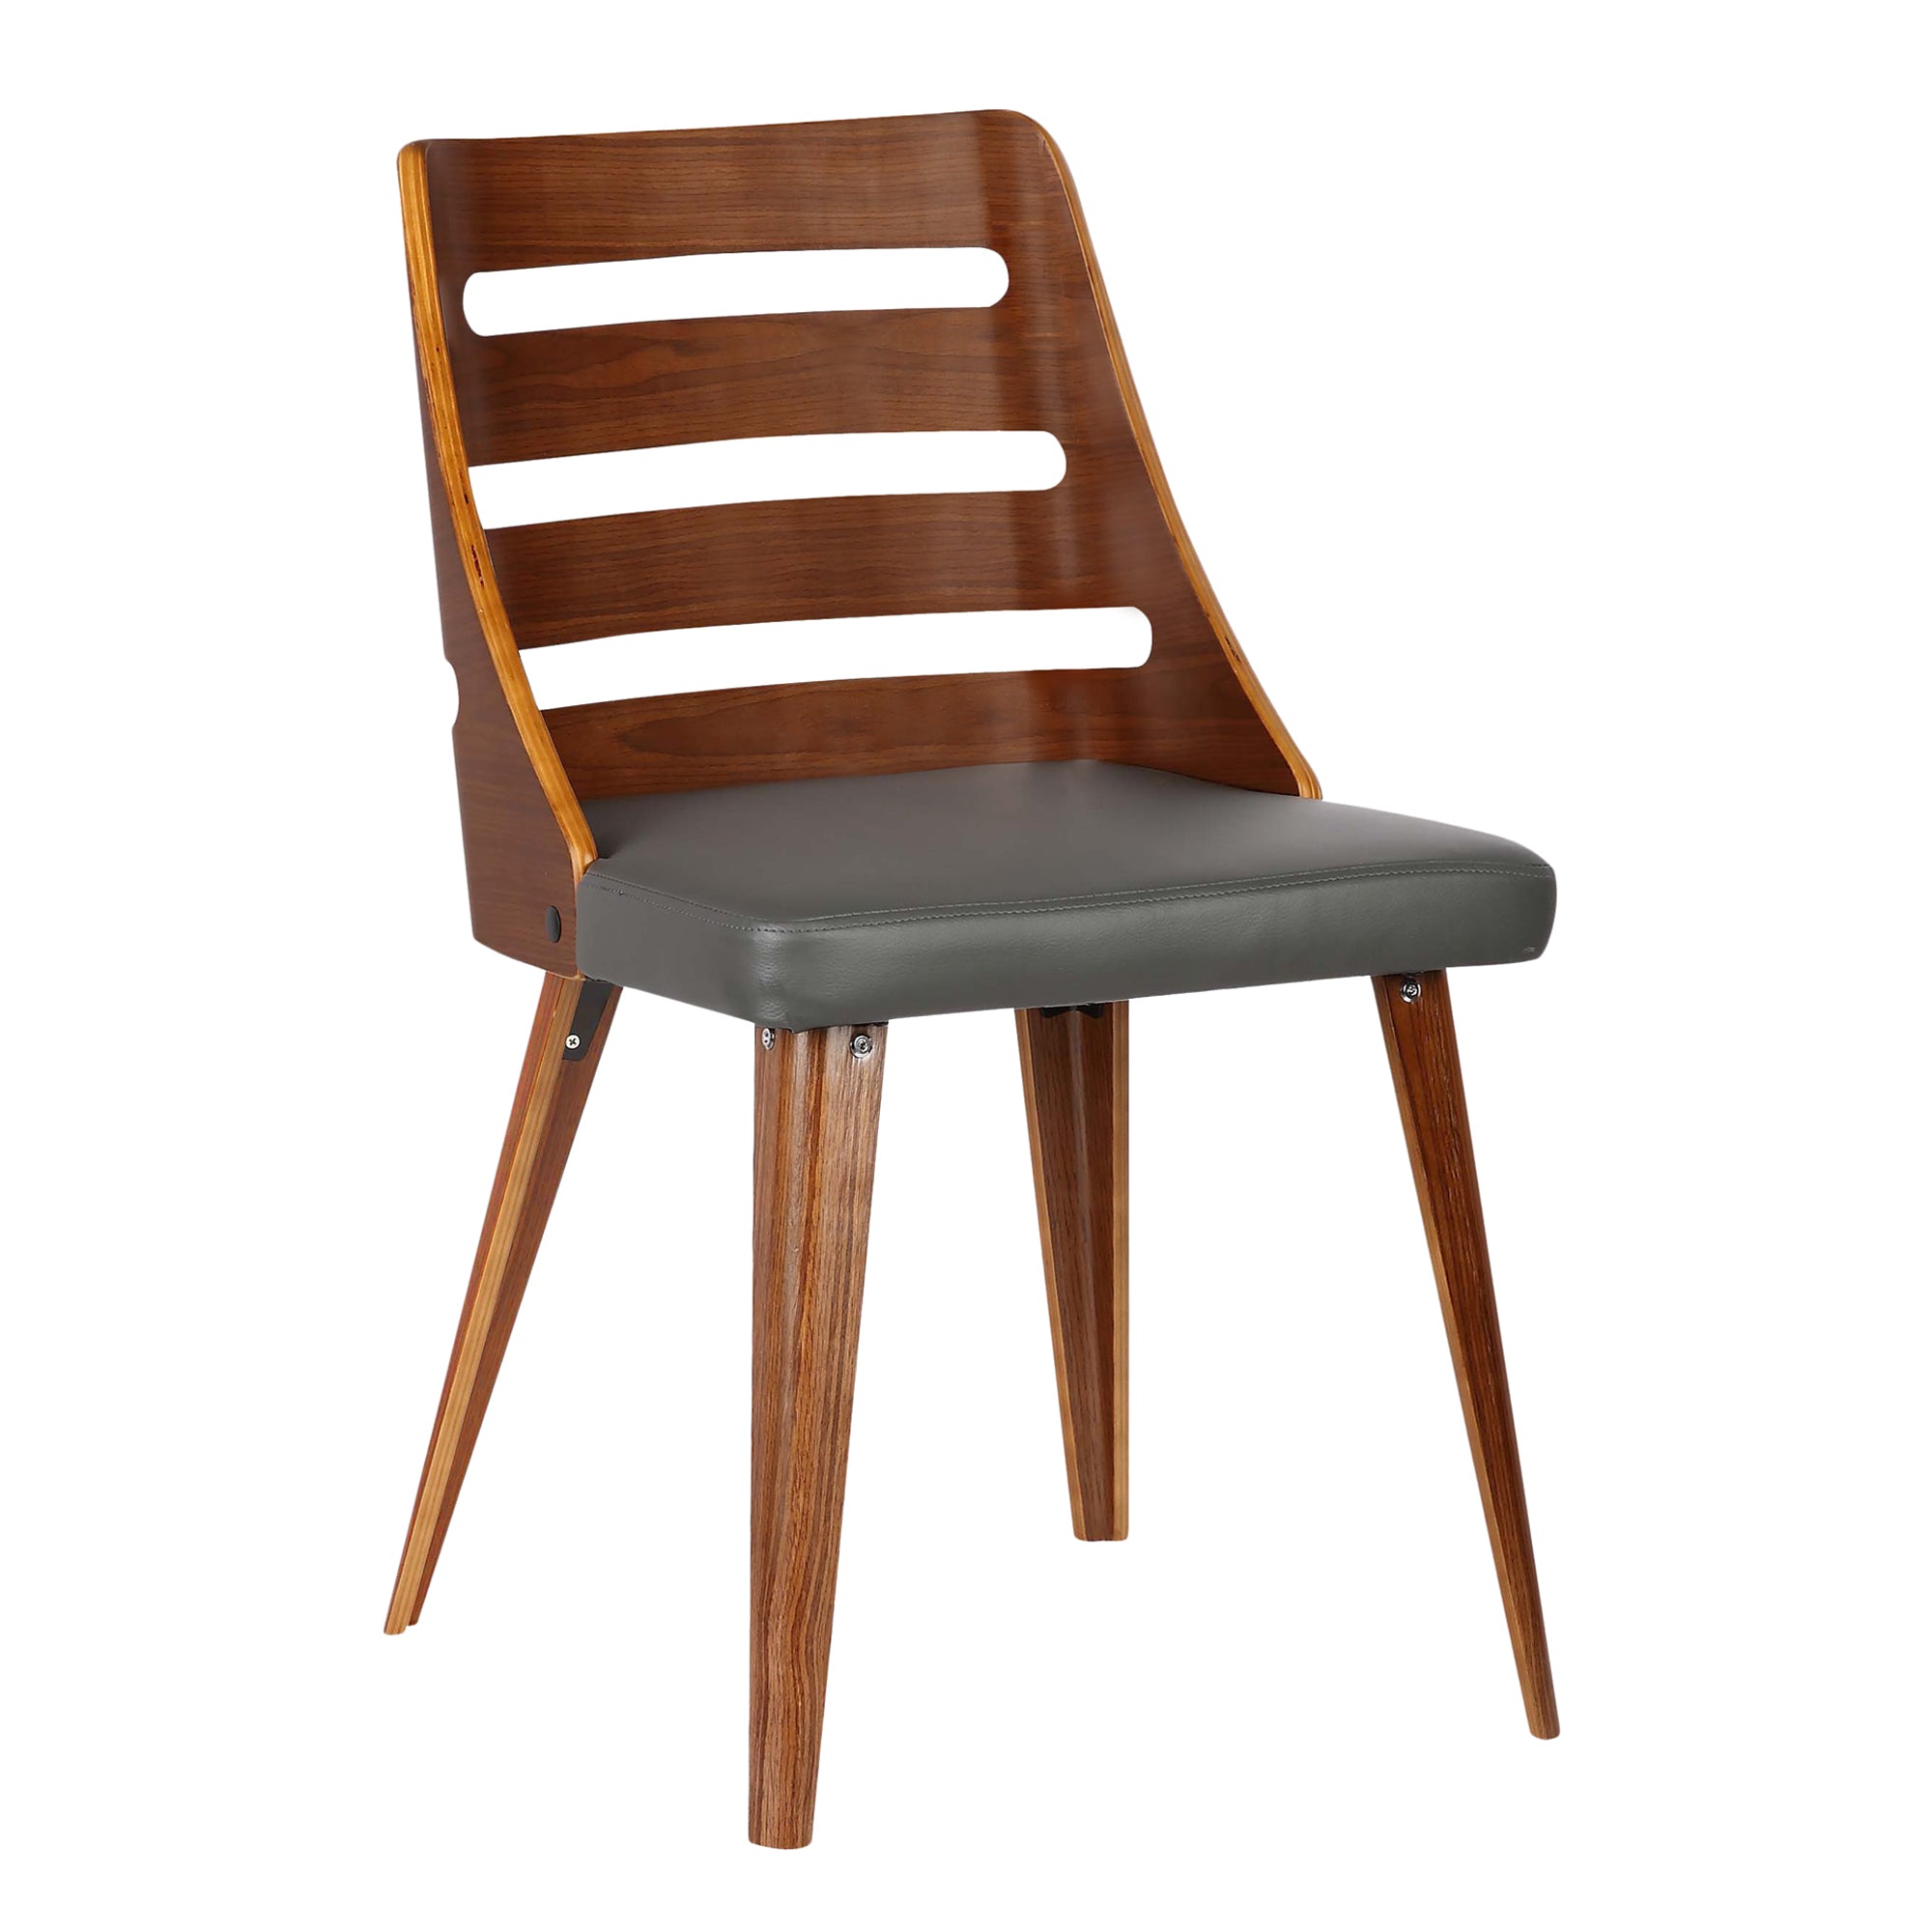 Armen Living Lcstsiwagray Storm Mid-century Dining Chair In Walnut Wood And Gray Faux Leather